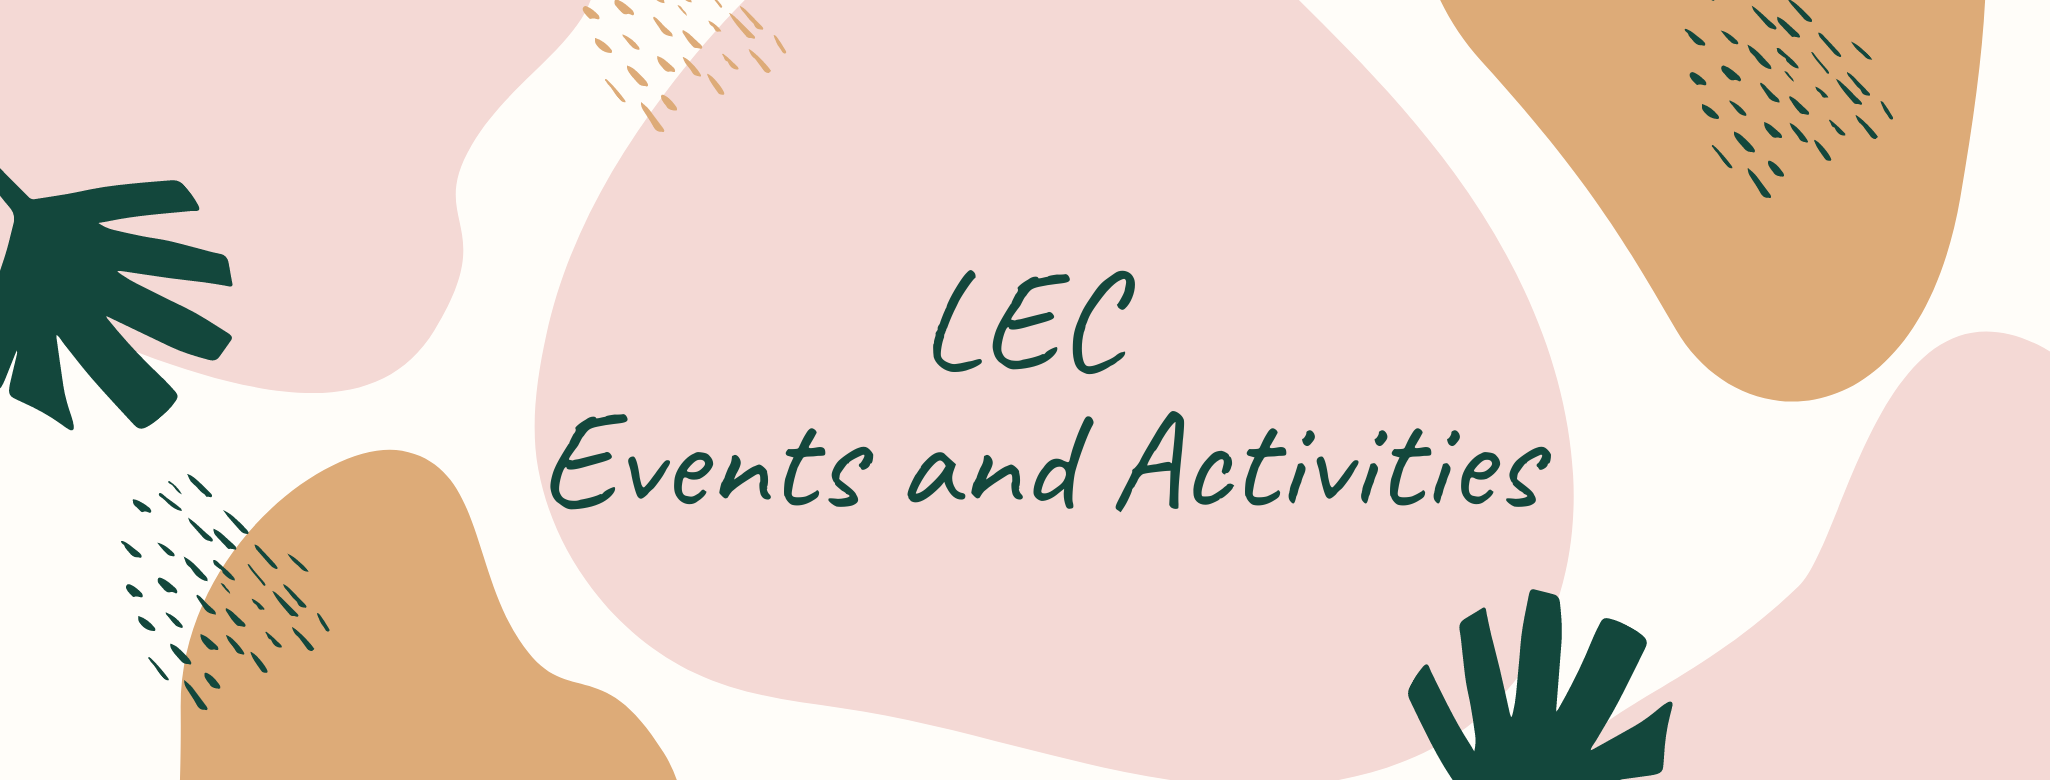 Events and Activities.png